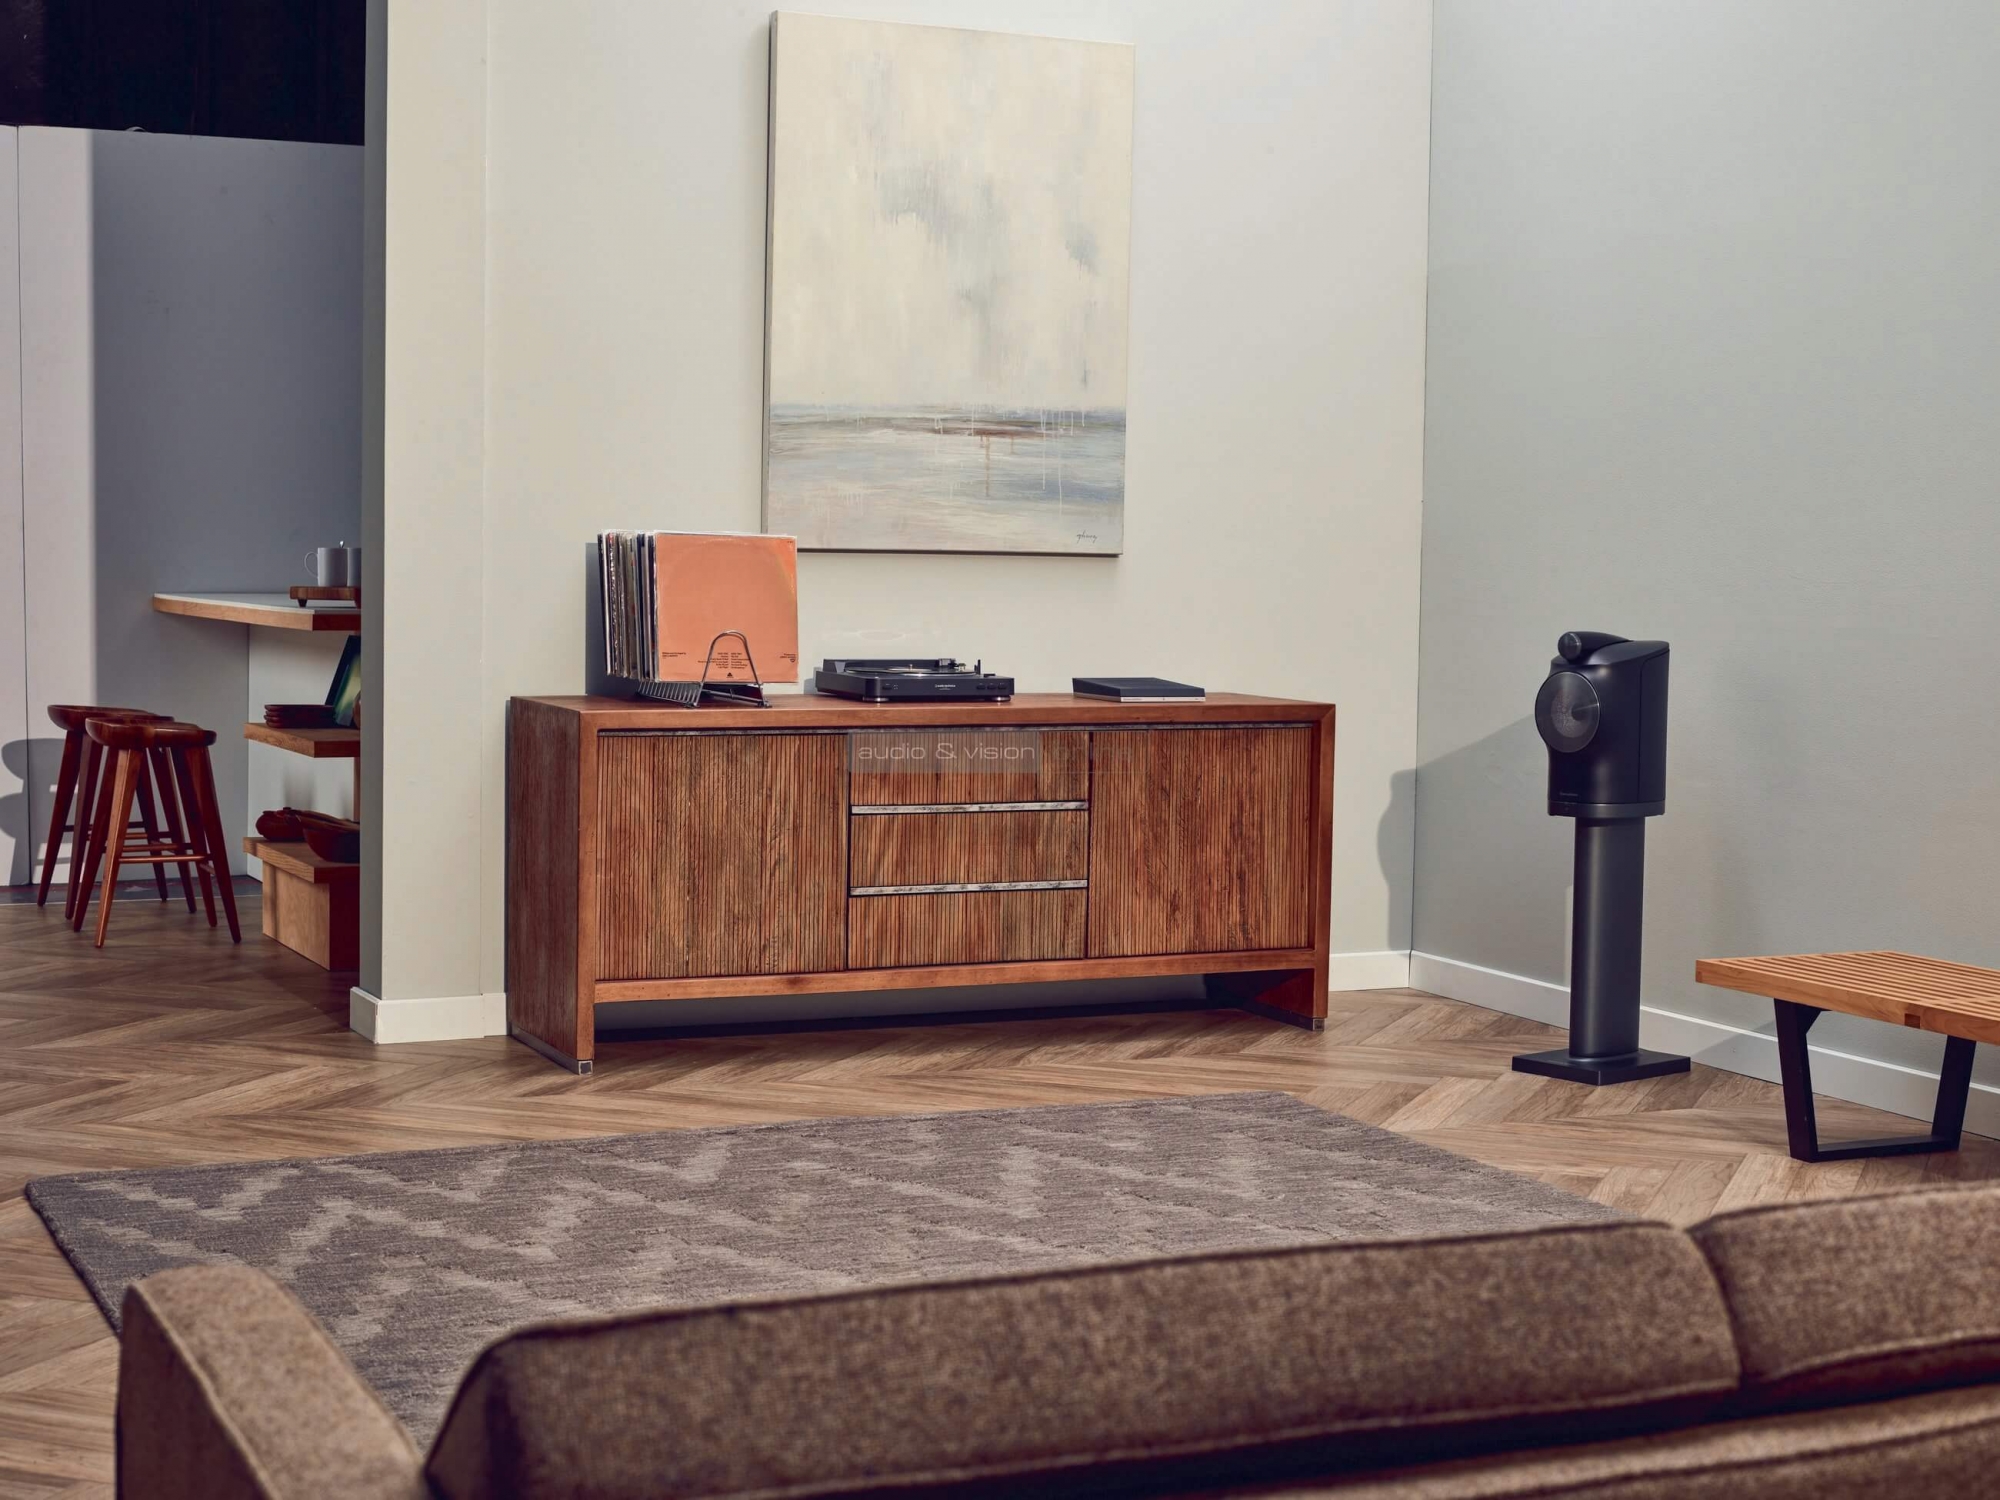 Bowers Wilkins Formation Duo hangfal